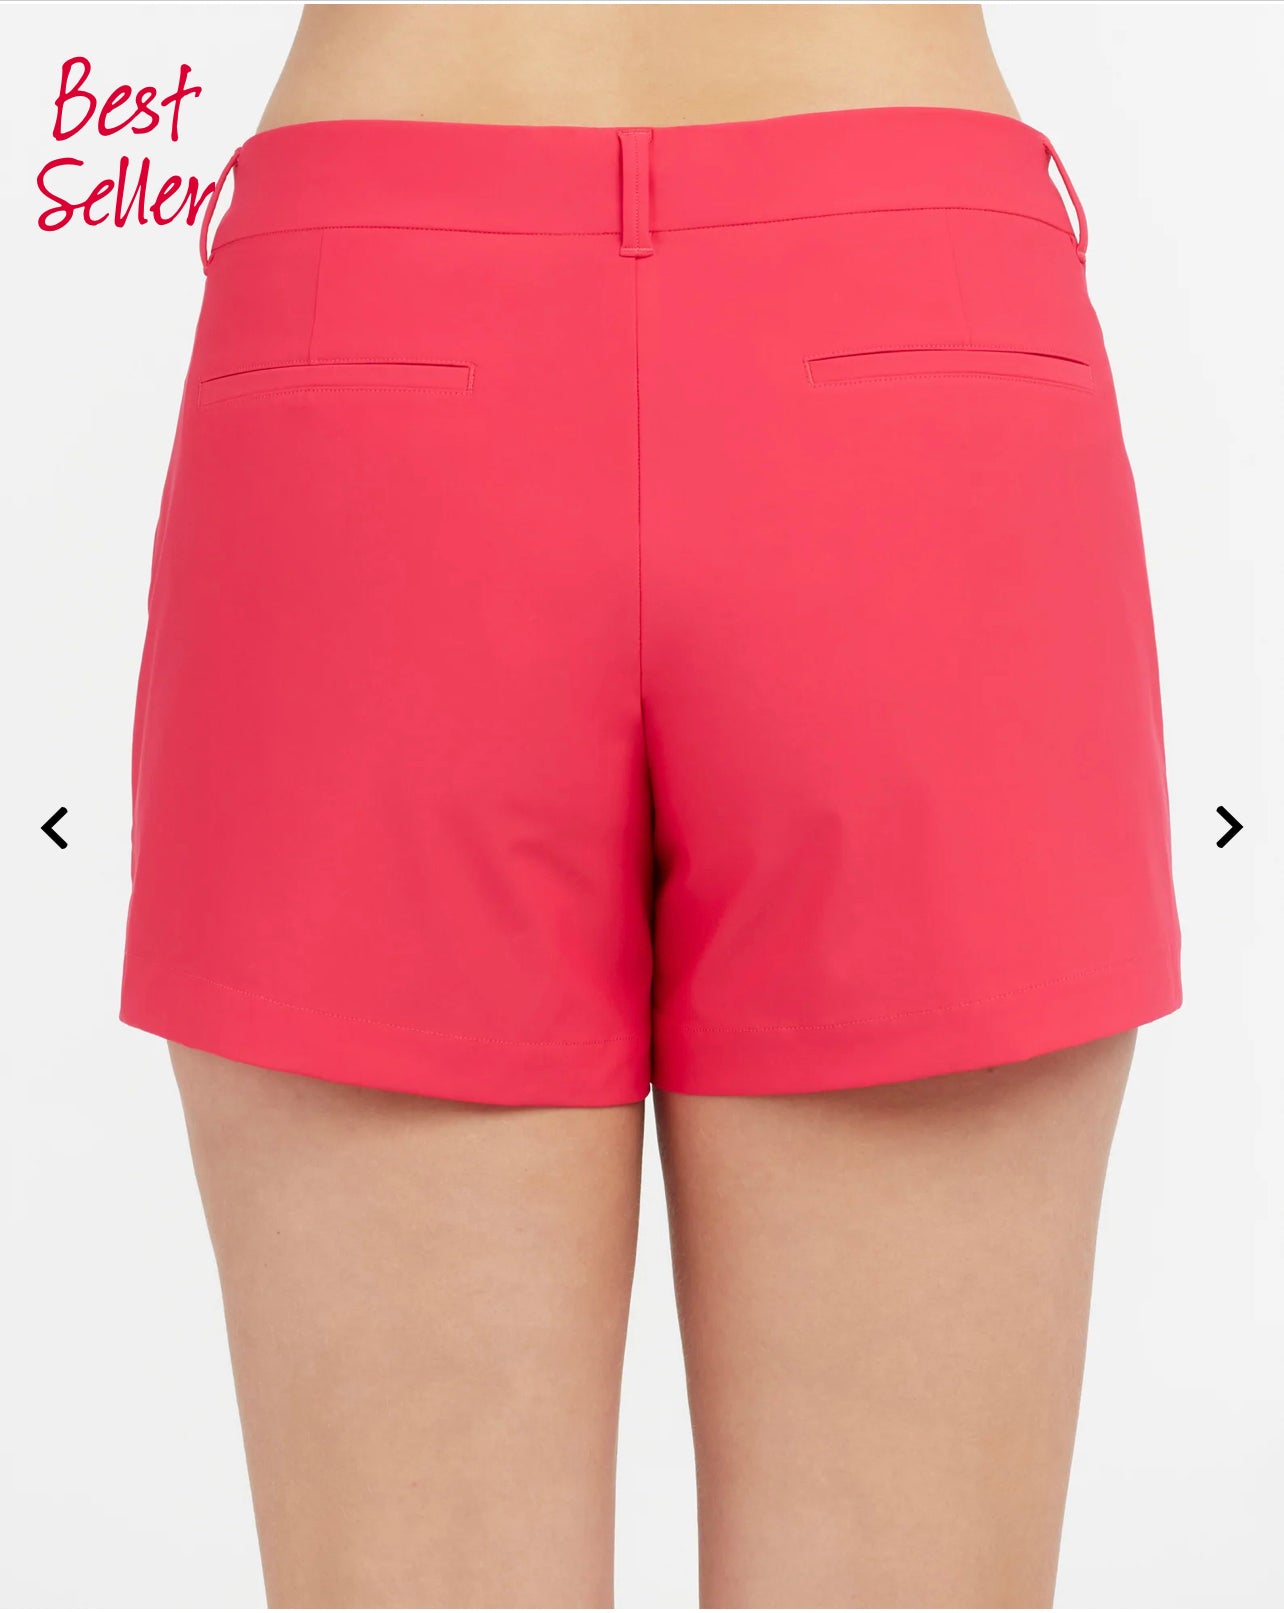 Apricot Lane Boutique - I decided to give the Spanx Power Shorts a